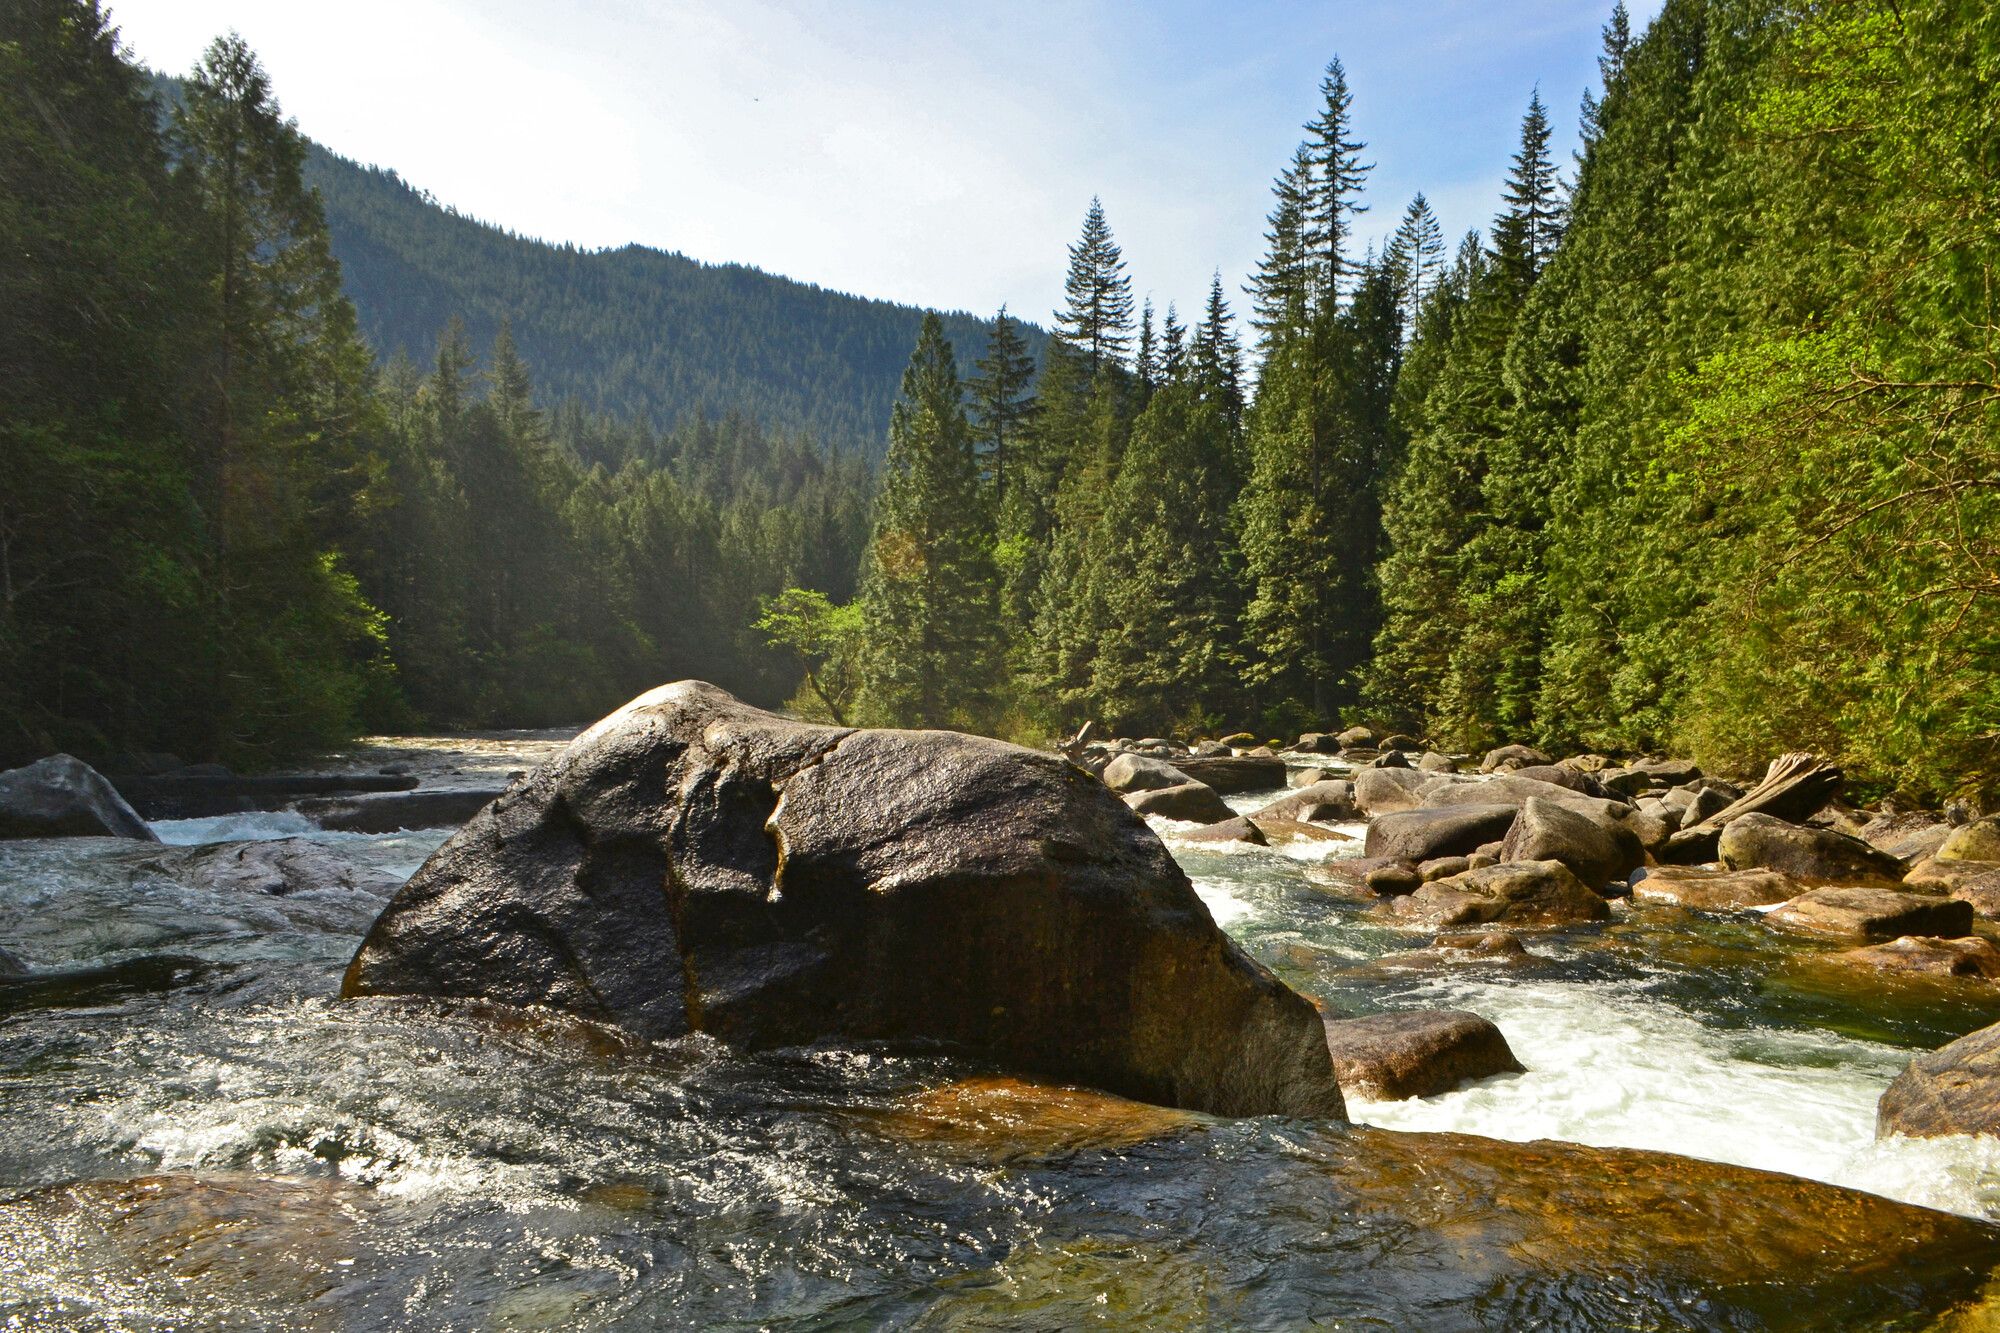 Mountains and forest are the backdrop to Gold Creek and its large creek bed boulders. Golden Ears Park.